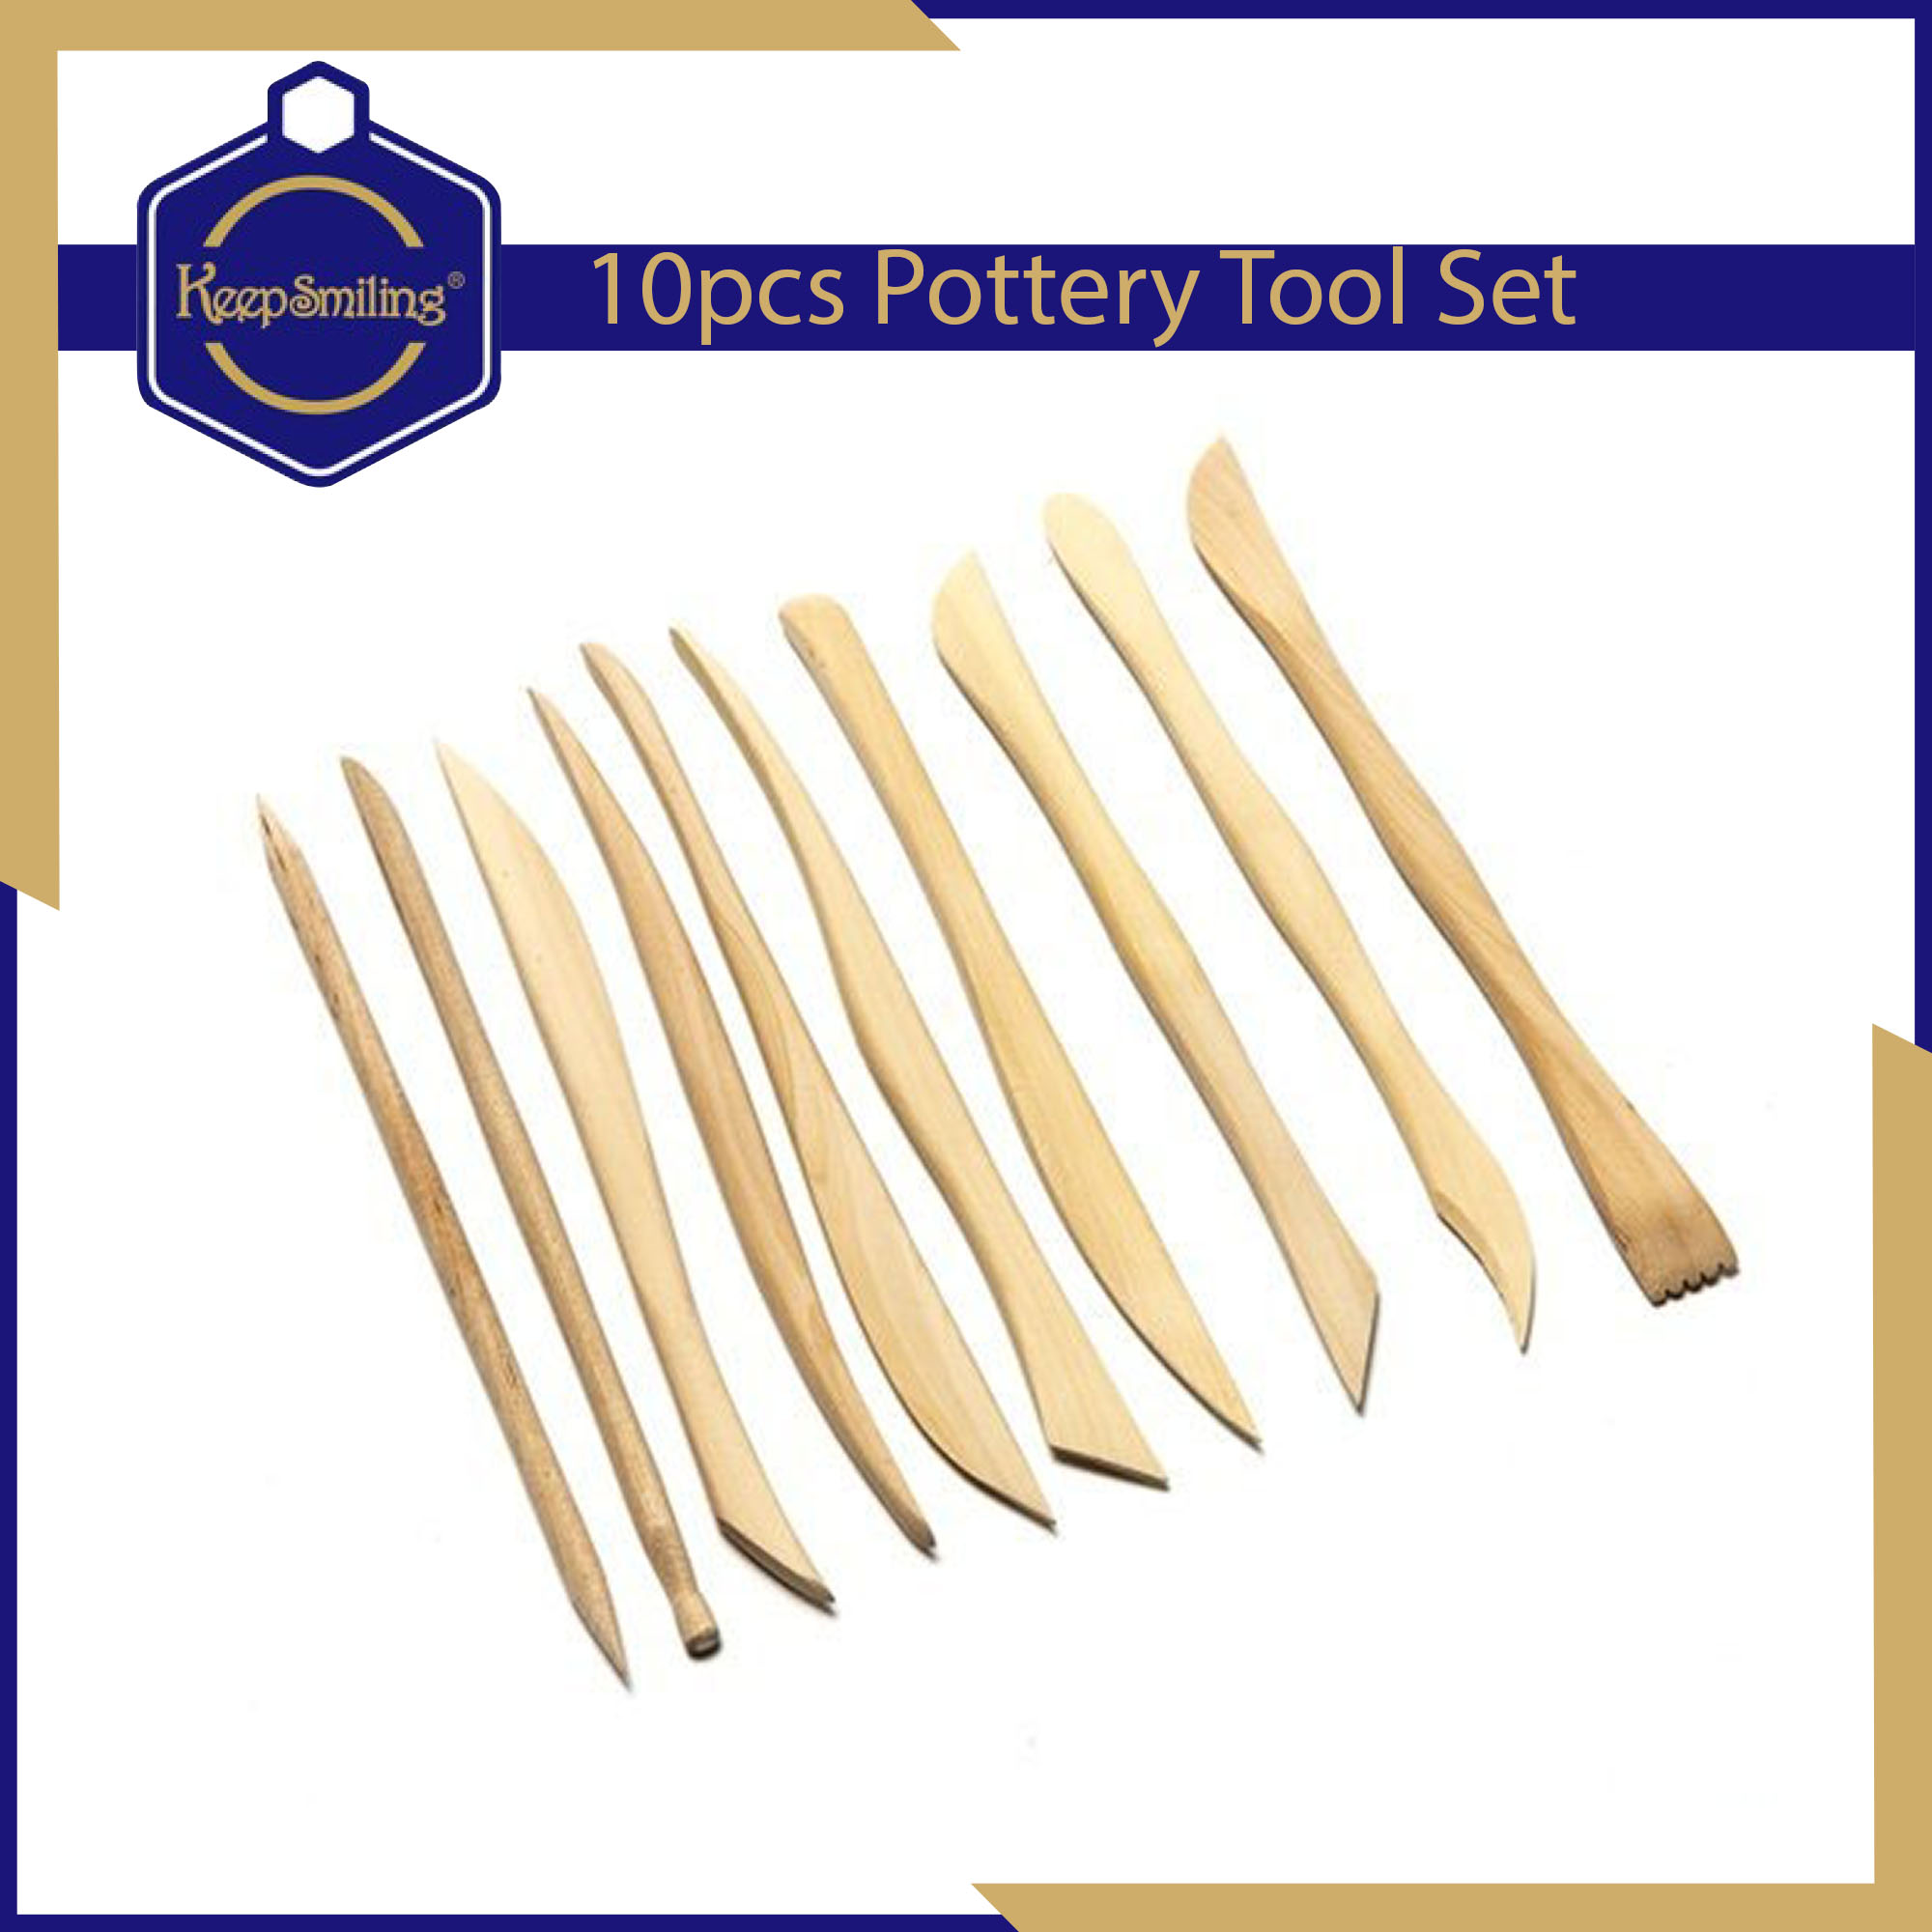 Keep Smiling 10pcs Clay Sculpting Tools Set Pottery Carving Ceramic Modelling